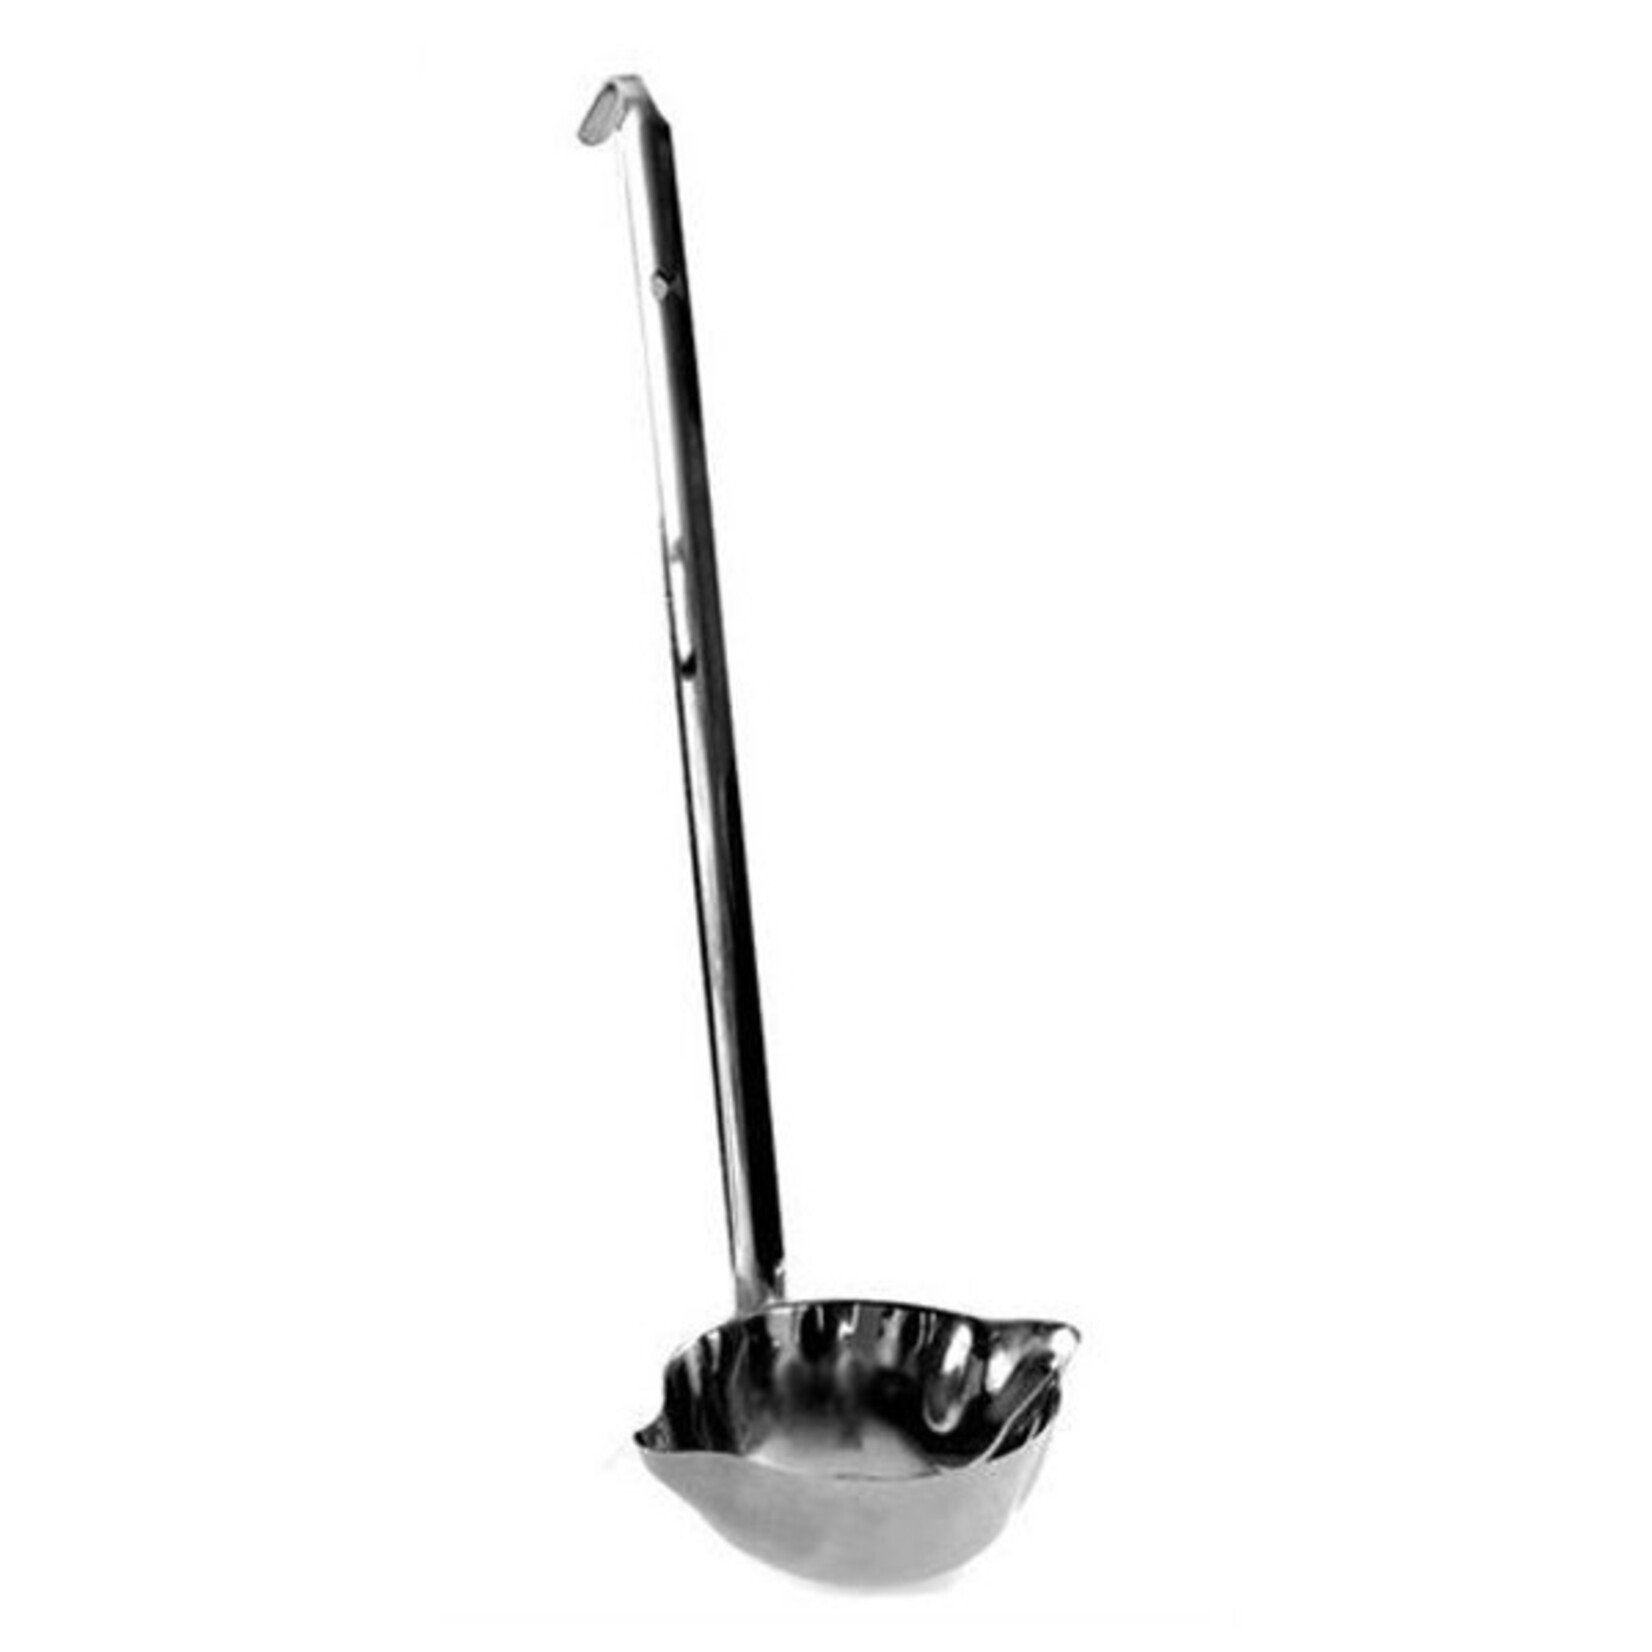 NorPro Stainless Steel Canning Ladle NorPro